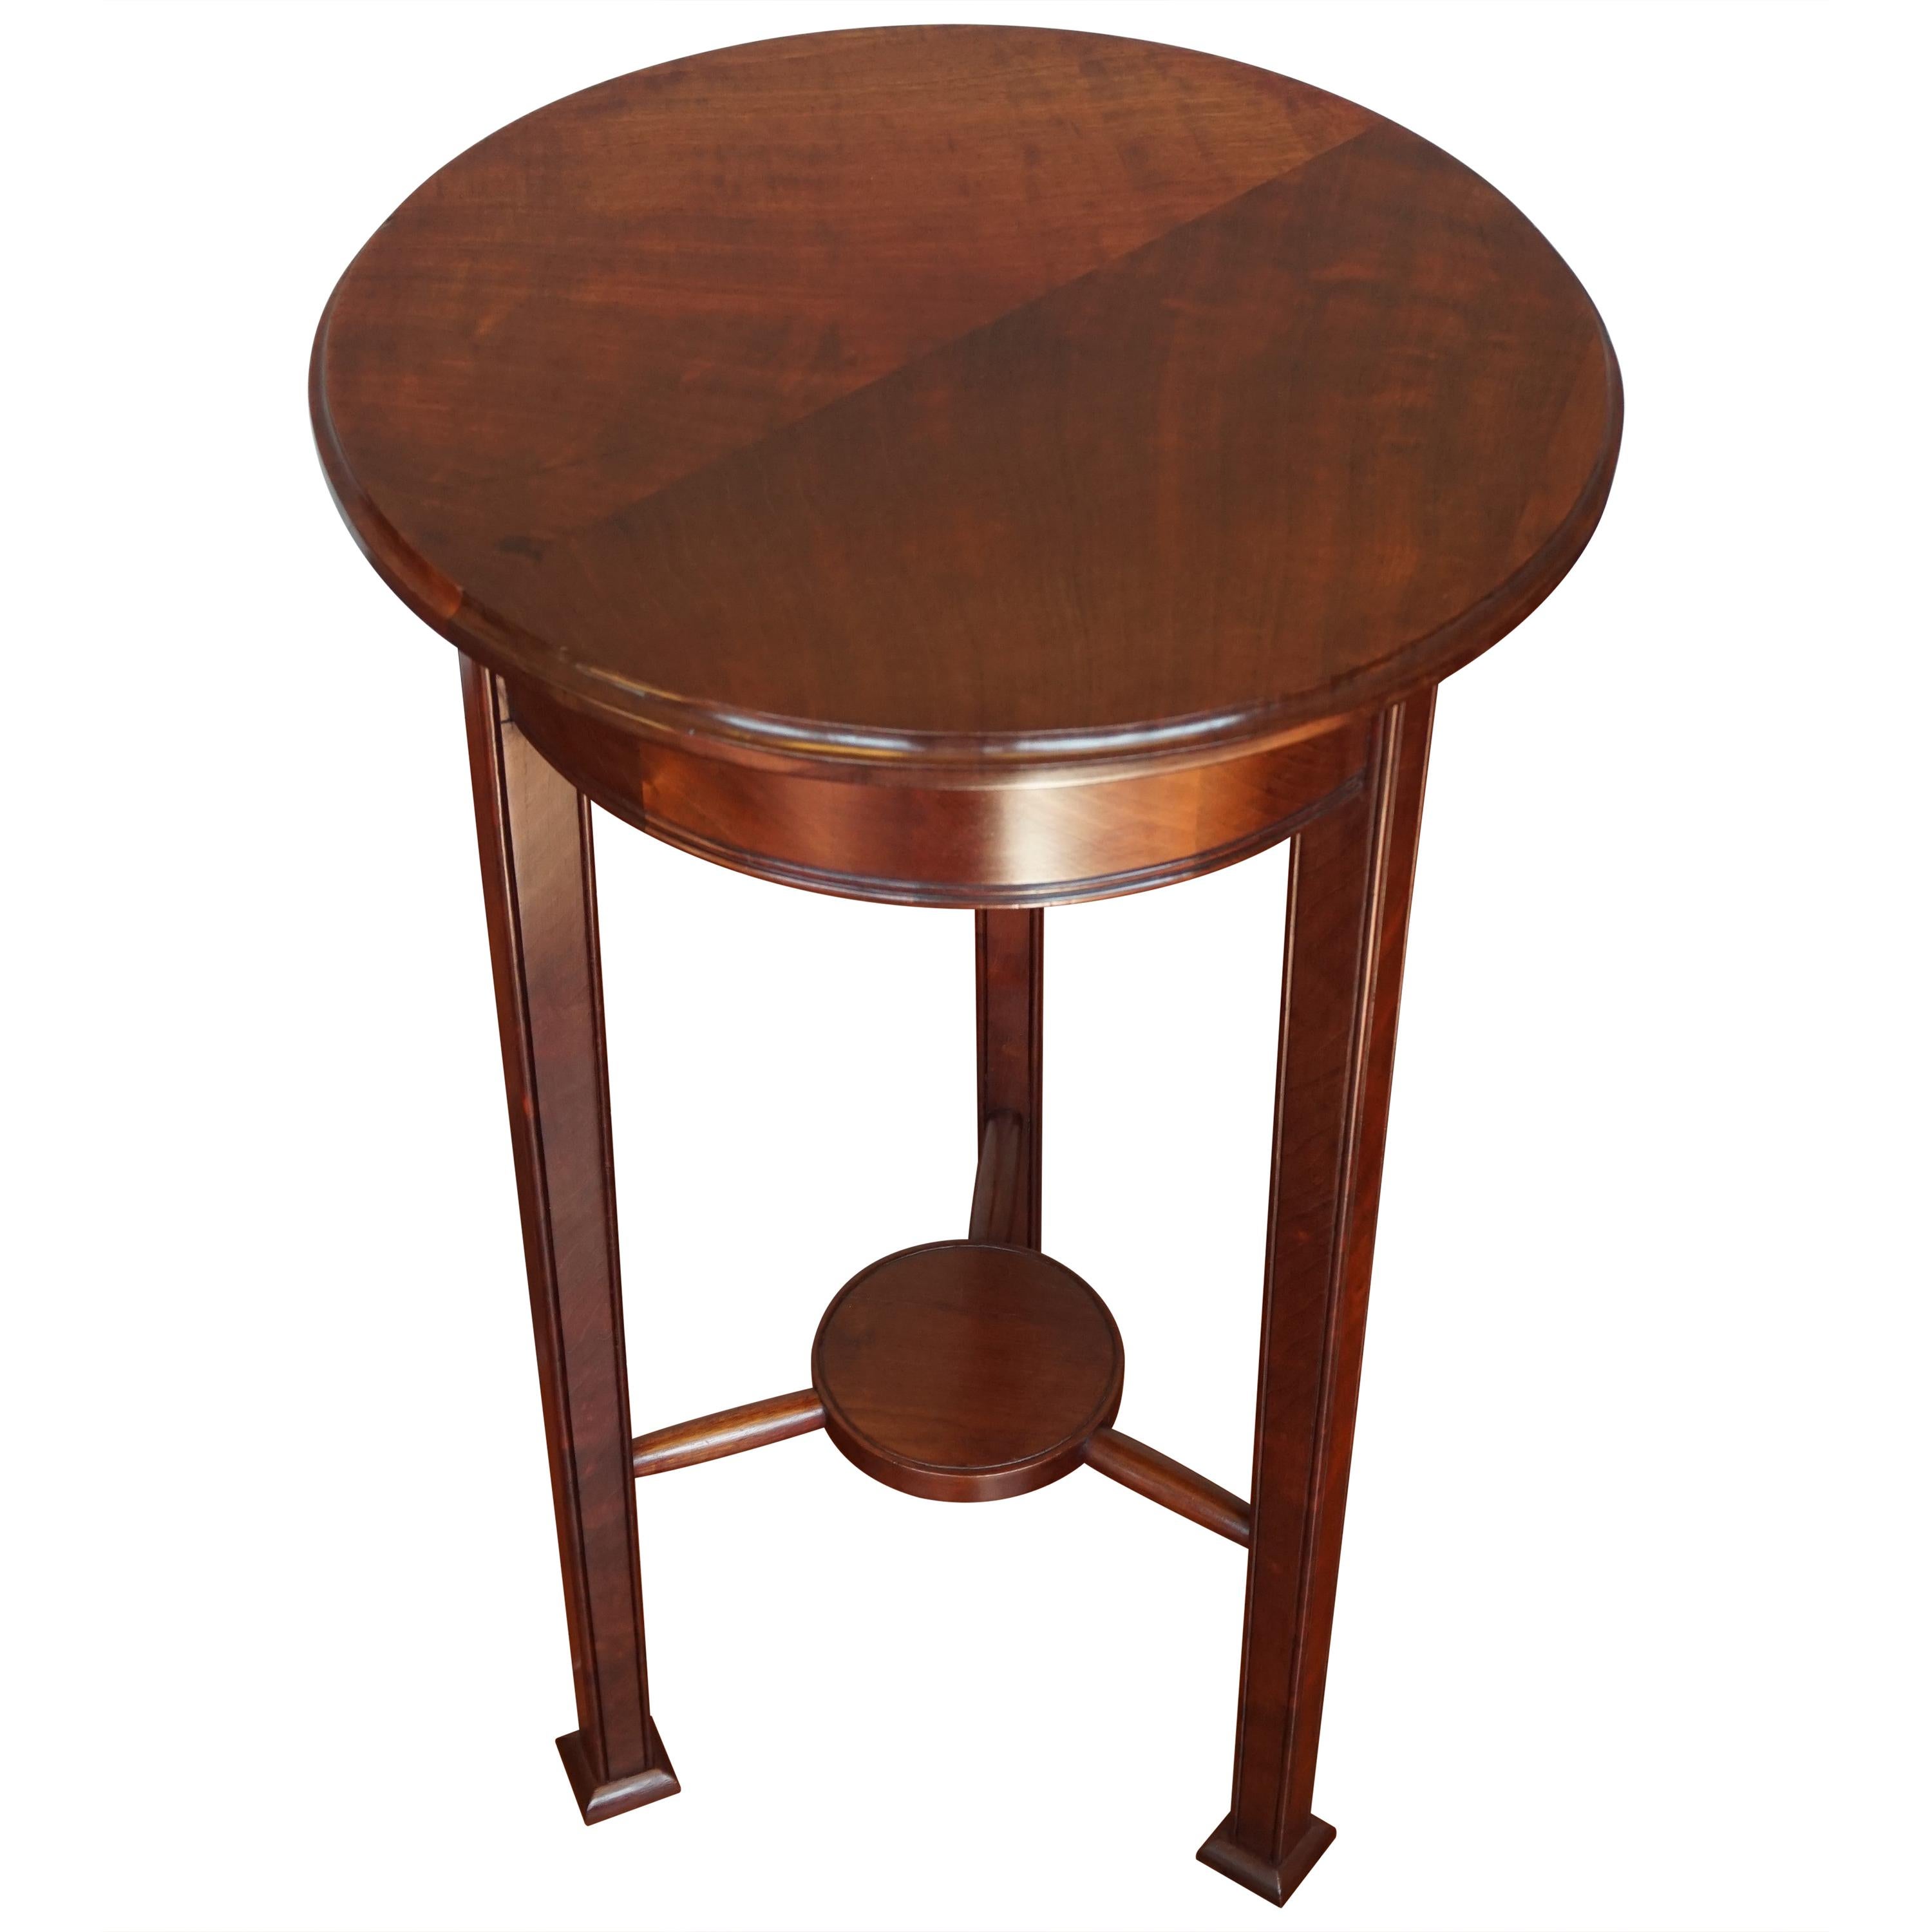 Wonderful Solid Mahogany Art Deco Pedestal Table and Sculpture Stand circa 1920